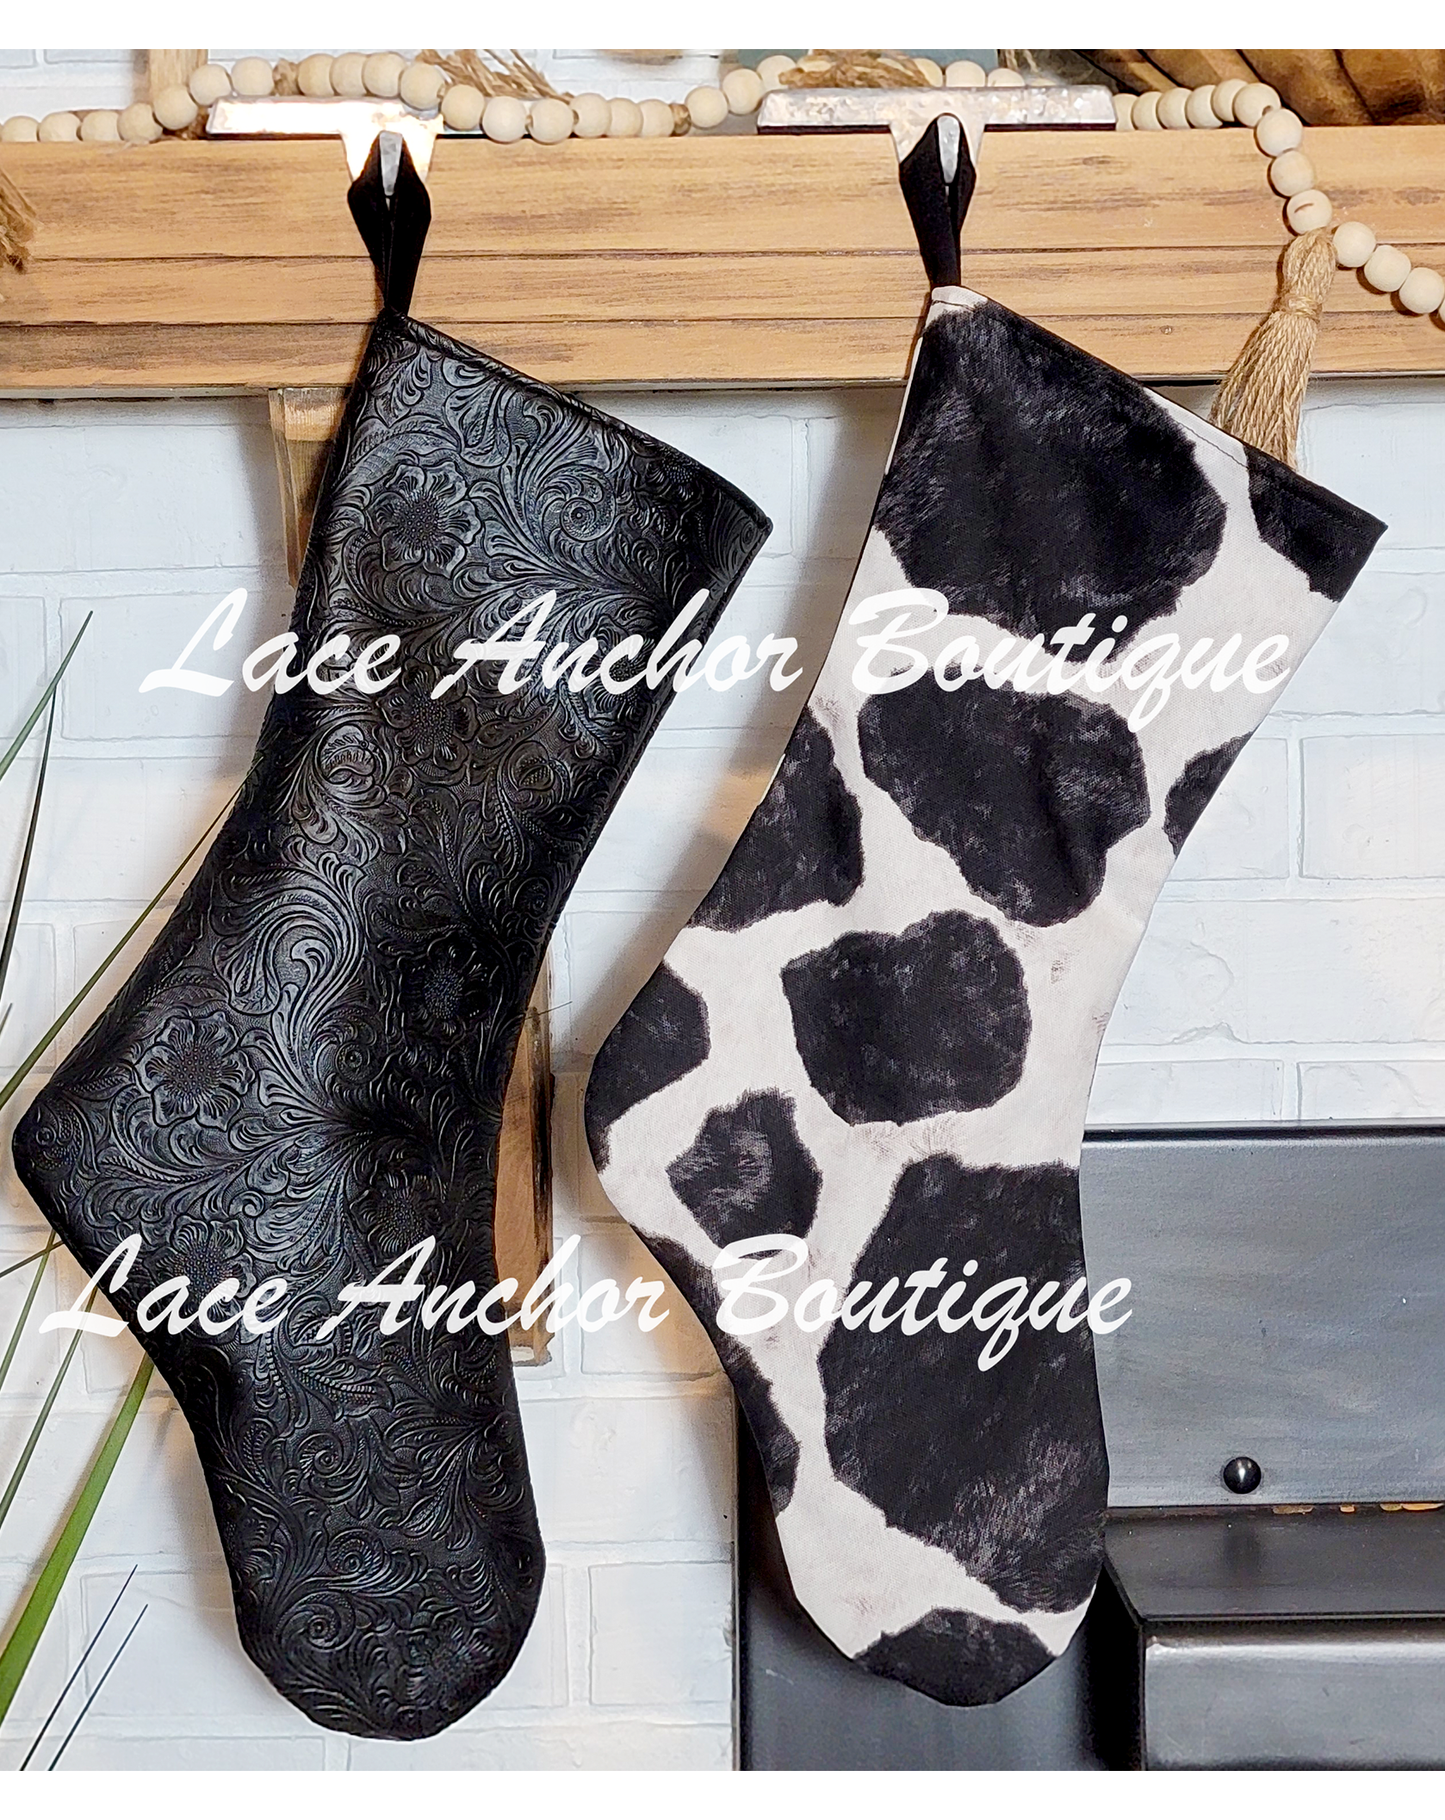 Cow Print, Leather, & Suede Stockings